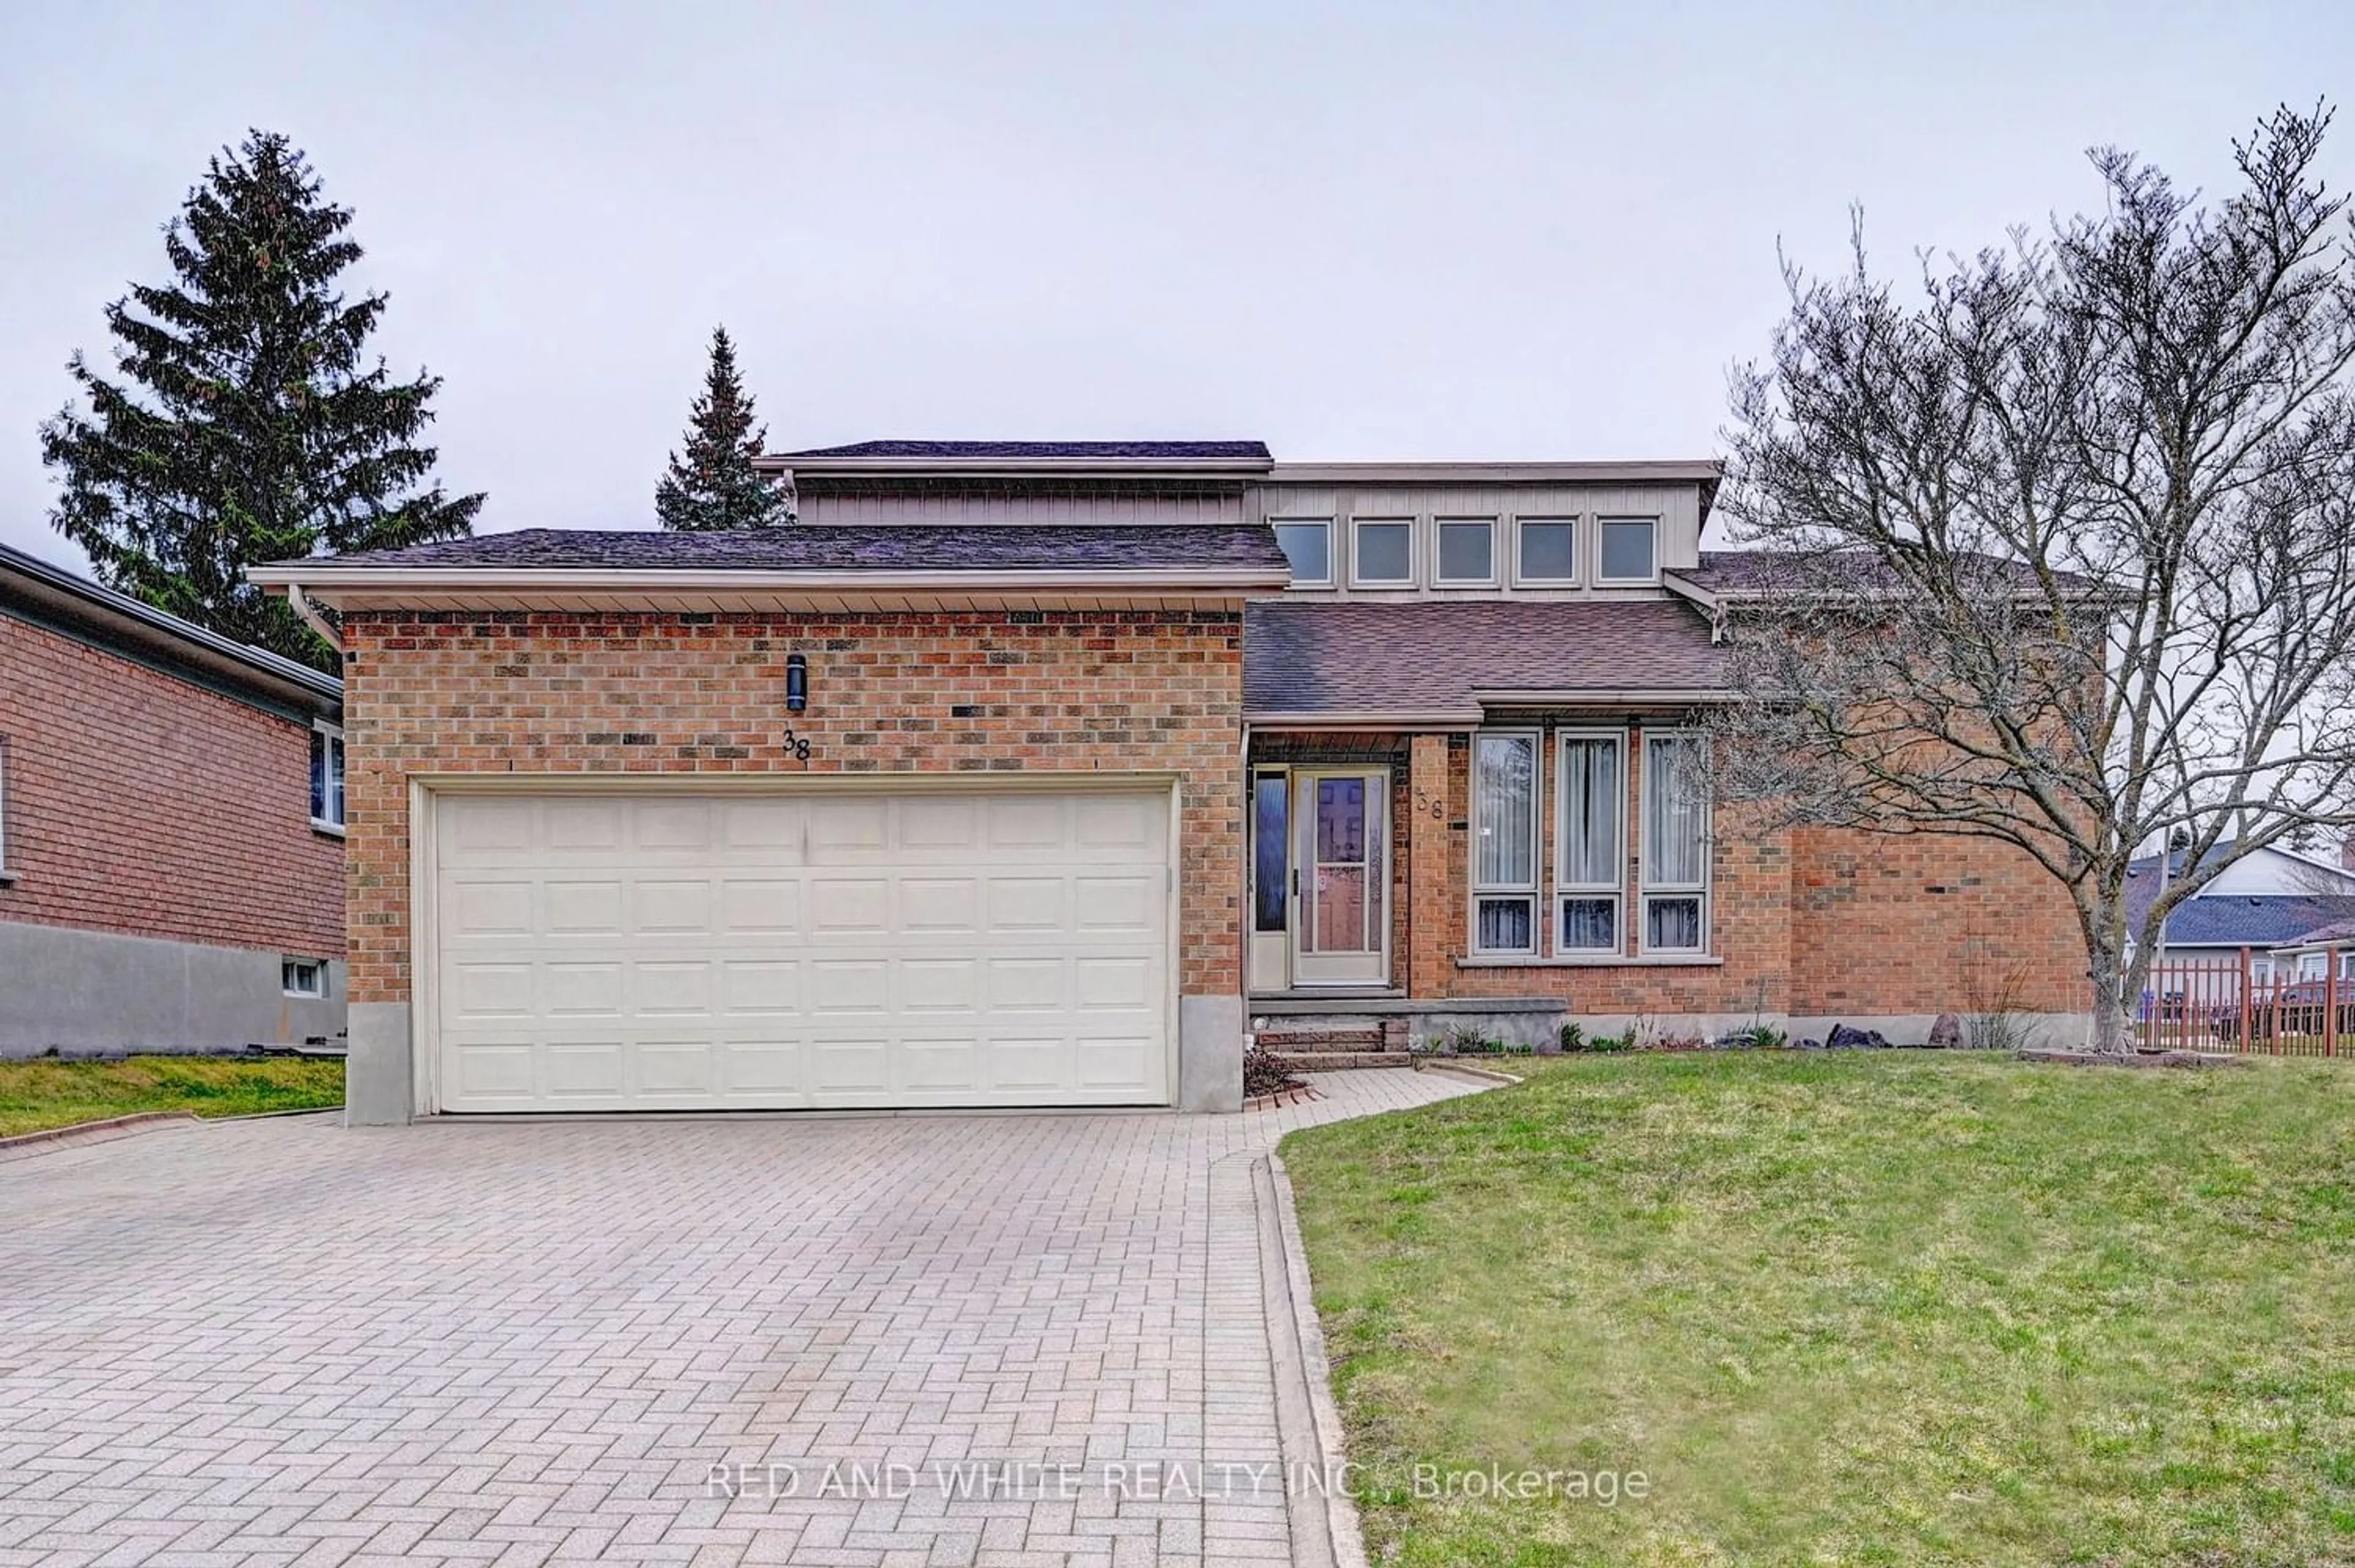 Home with brick exterior material for 38 Burton Rd, Guelph Ontario N1H 7Z4